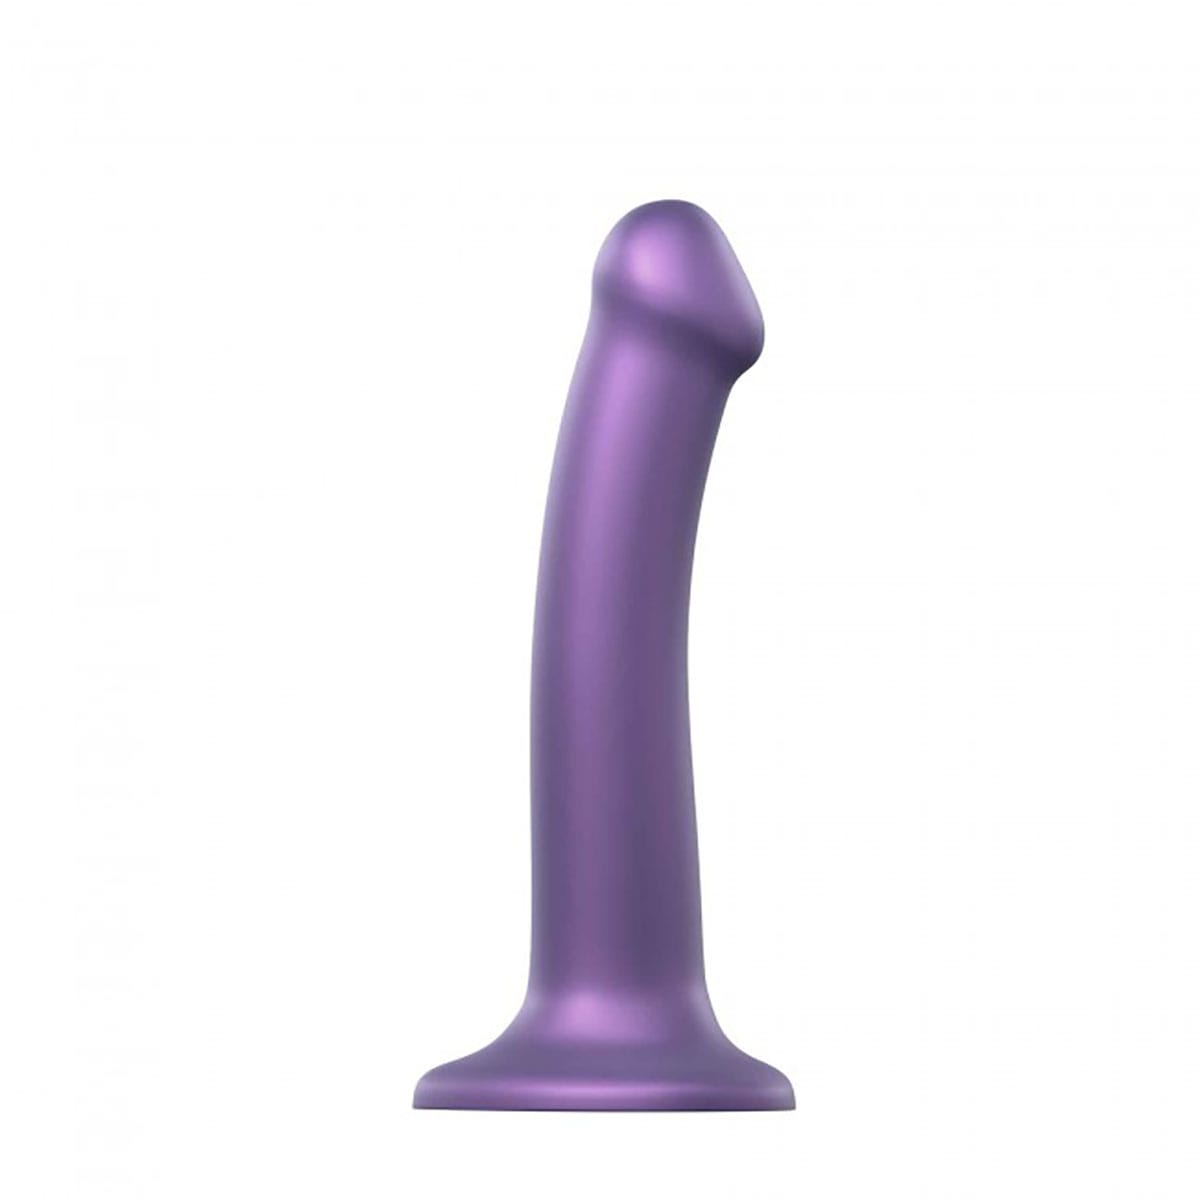 Buy Strap On Me Dil   Metallic Purple  long and 1.3 thick dildo made by Strap-On-Me.